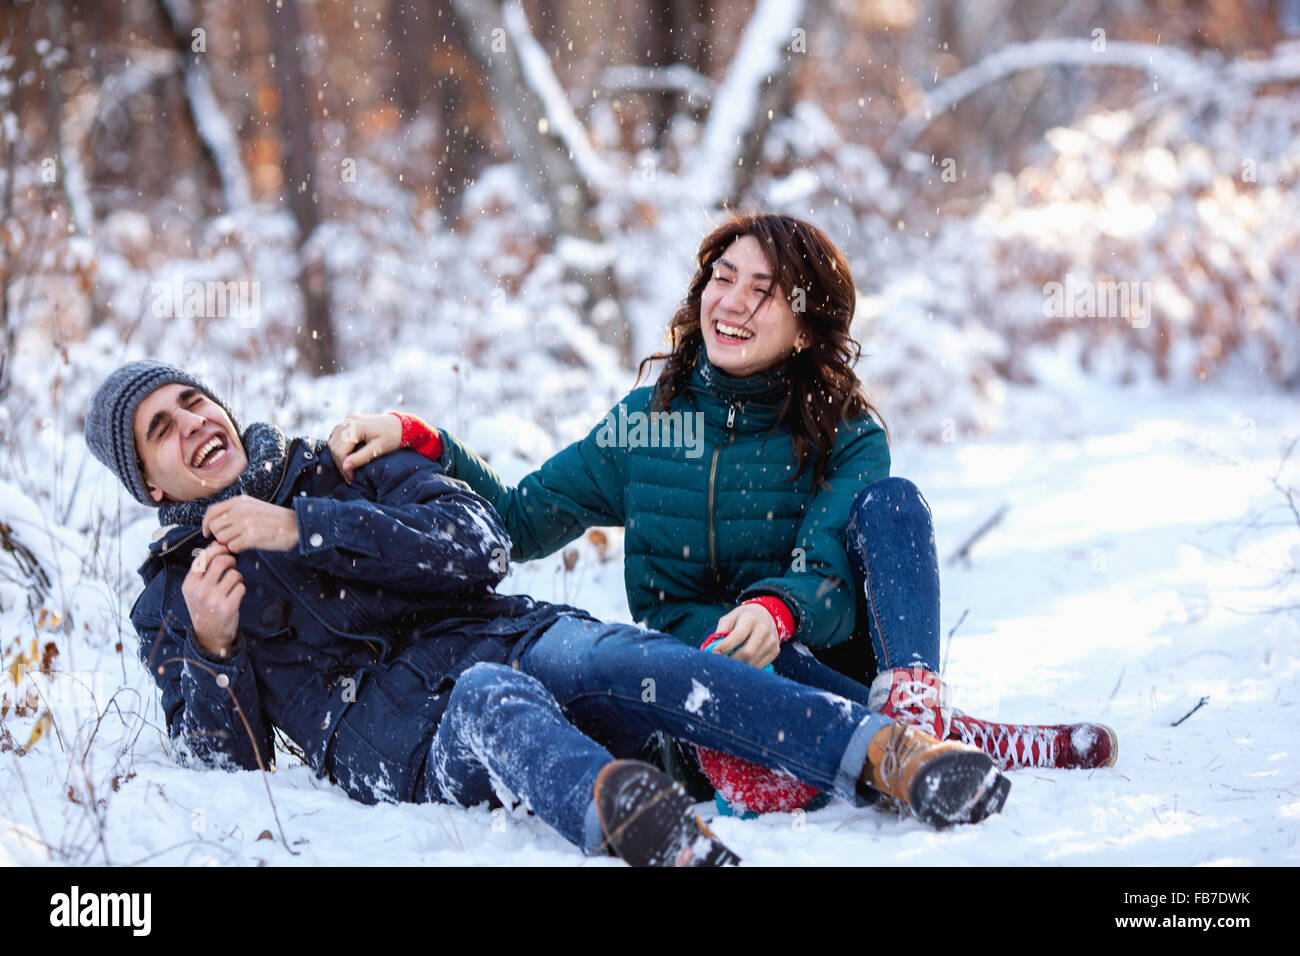 Full length of playful young couple sitting on snowy field Stock Photo